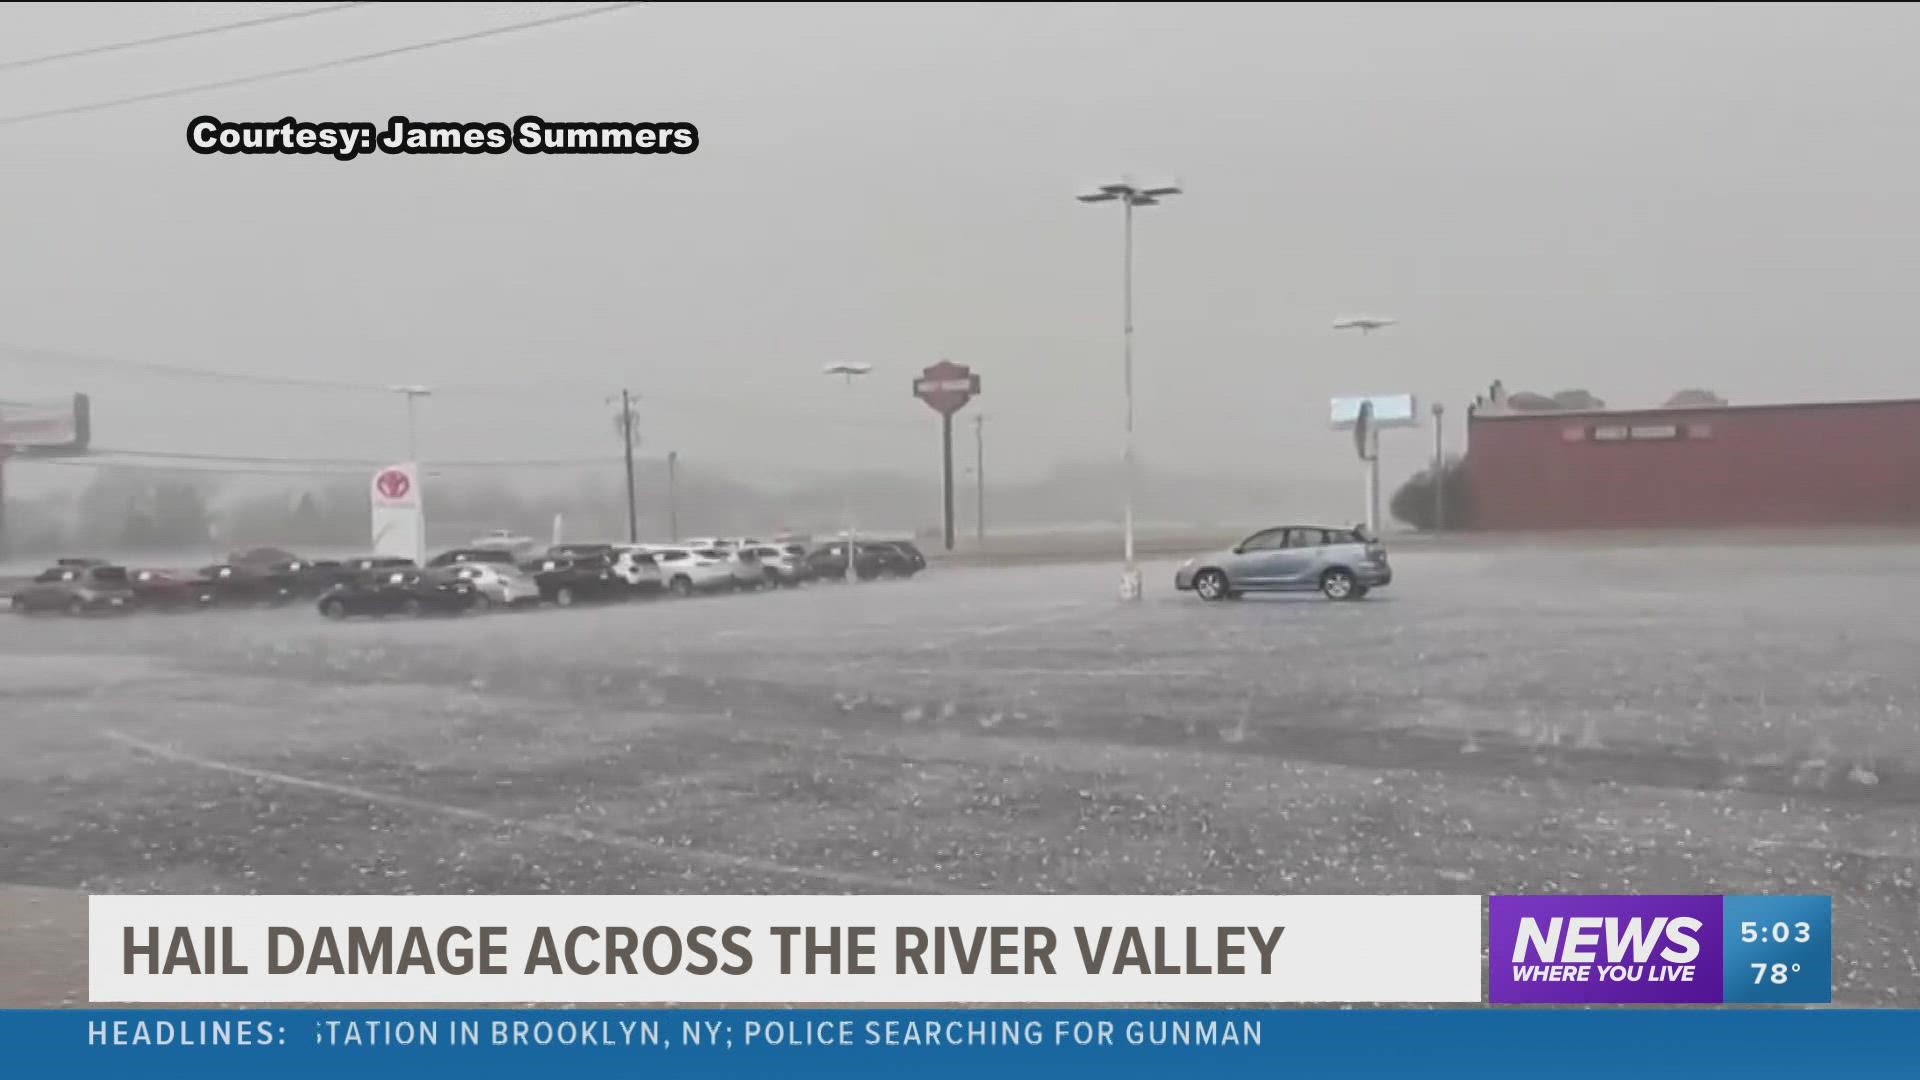 Many across the River Valley are left with hail damage from Monday’s severe storms, so we spoke with an insurance agent about what you need to do if you have damage.